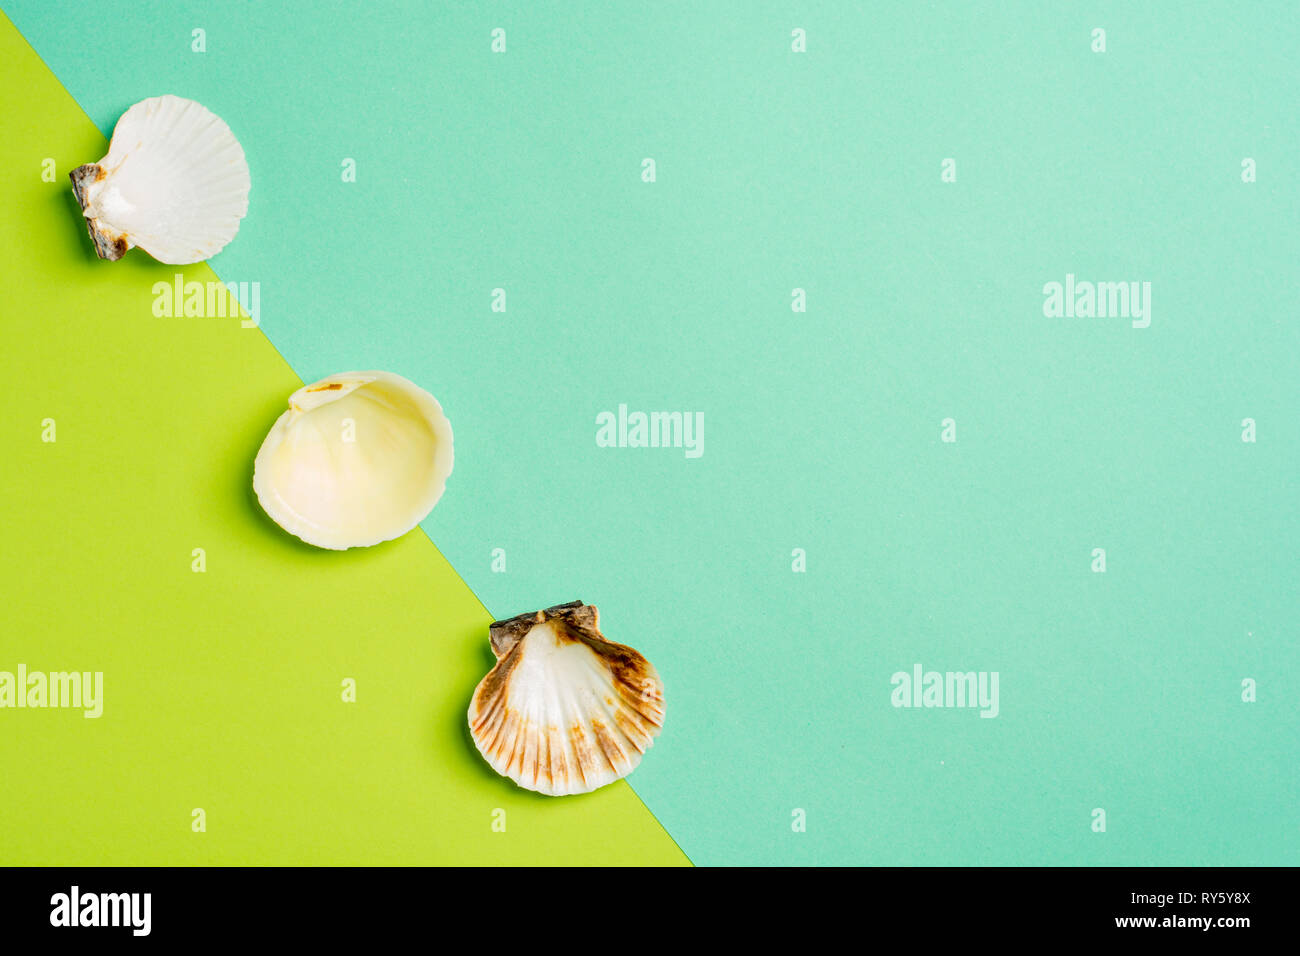 Summer holidays. Seashells on a light blue and green background. Sea souvenirs. Summer concept. Flat lay, top view, copy space. Stock Photo